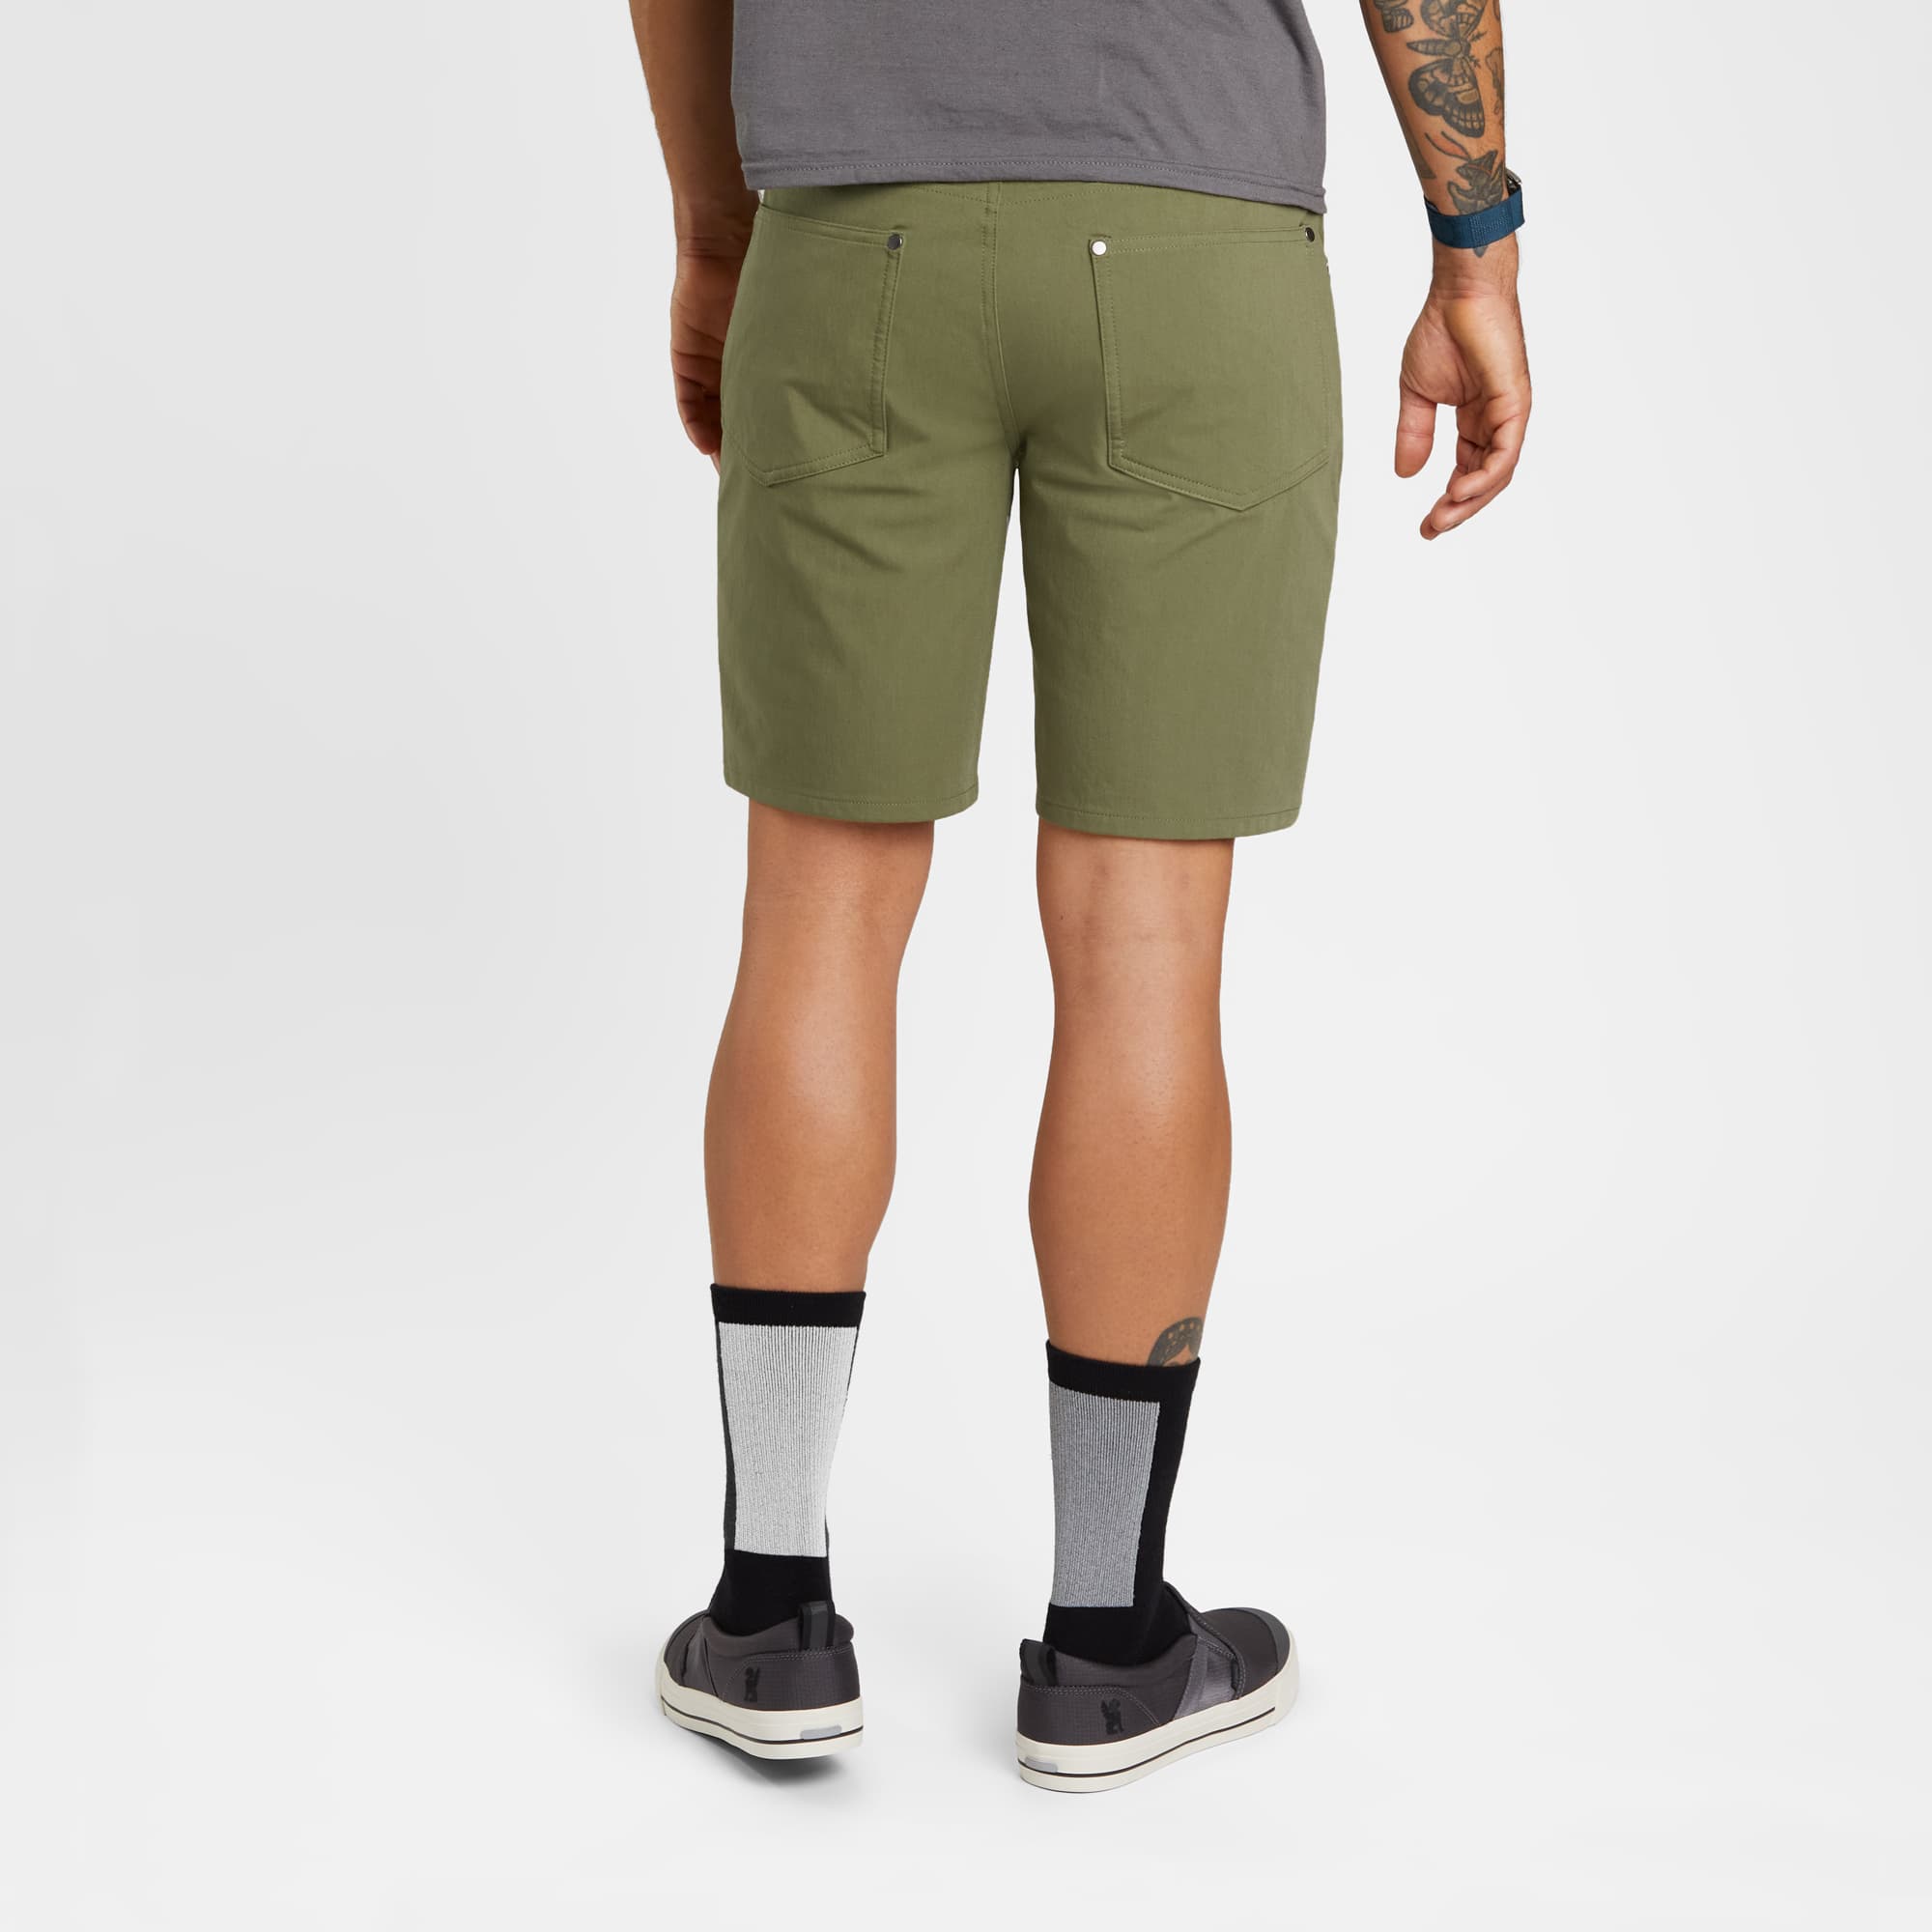 Men's Madrona tech 5-pocket short in green worn by a man back view #color_olive branch